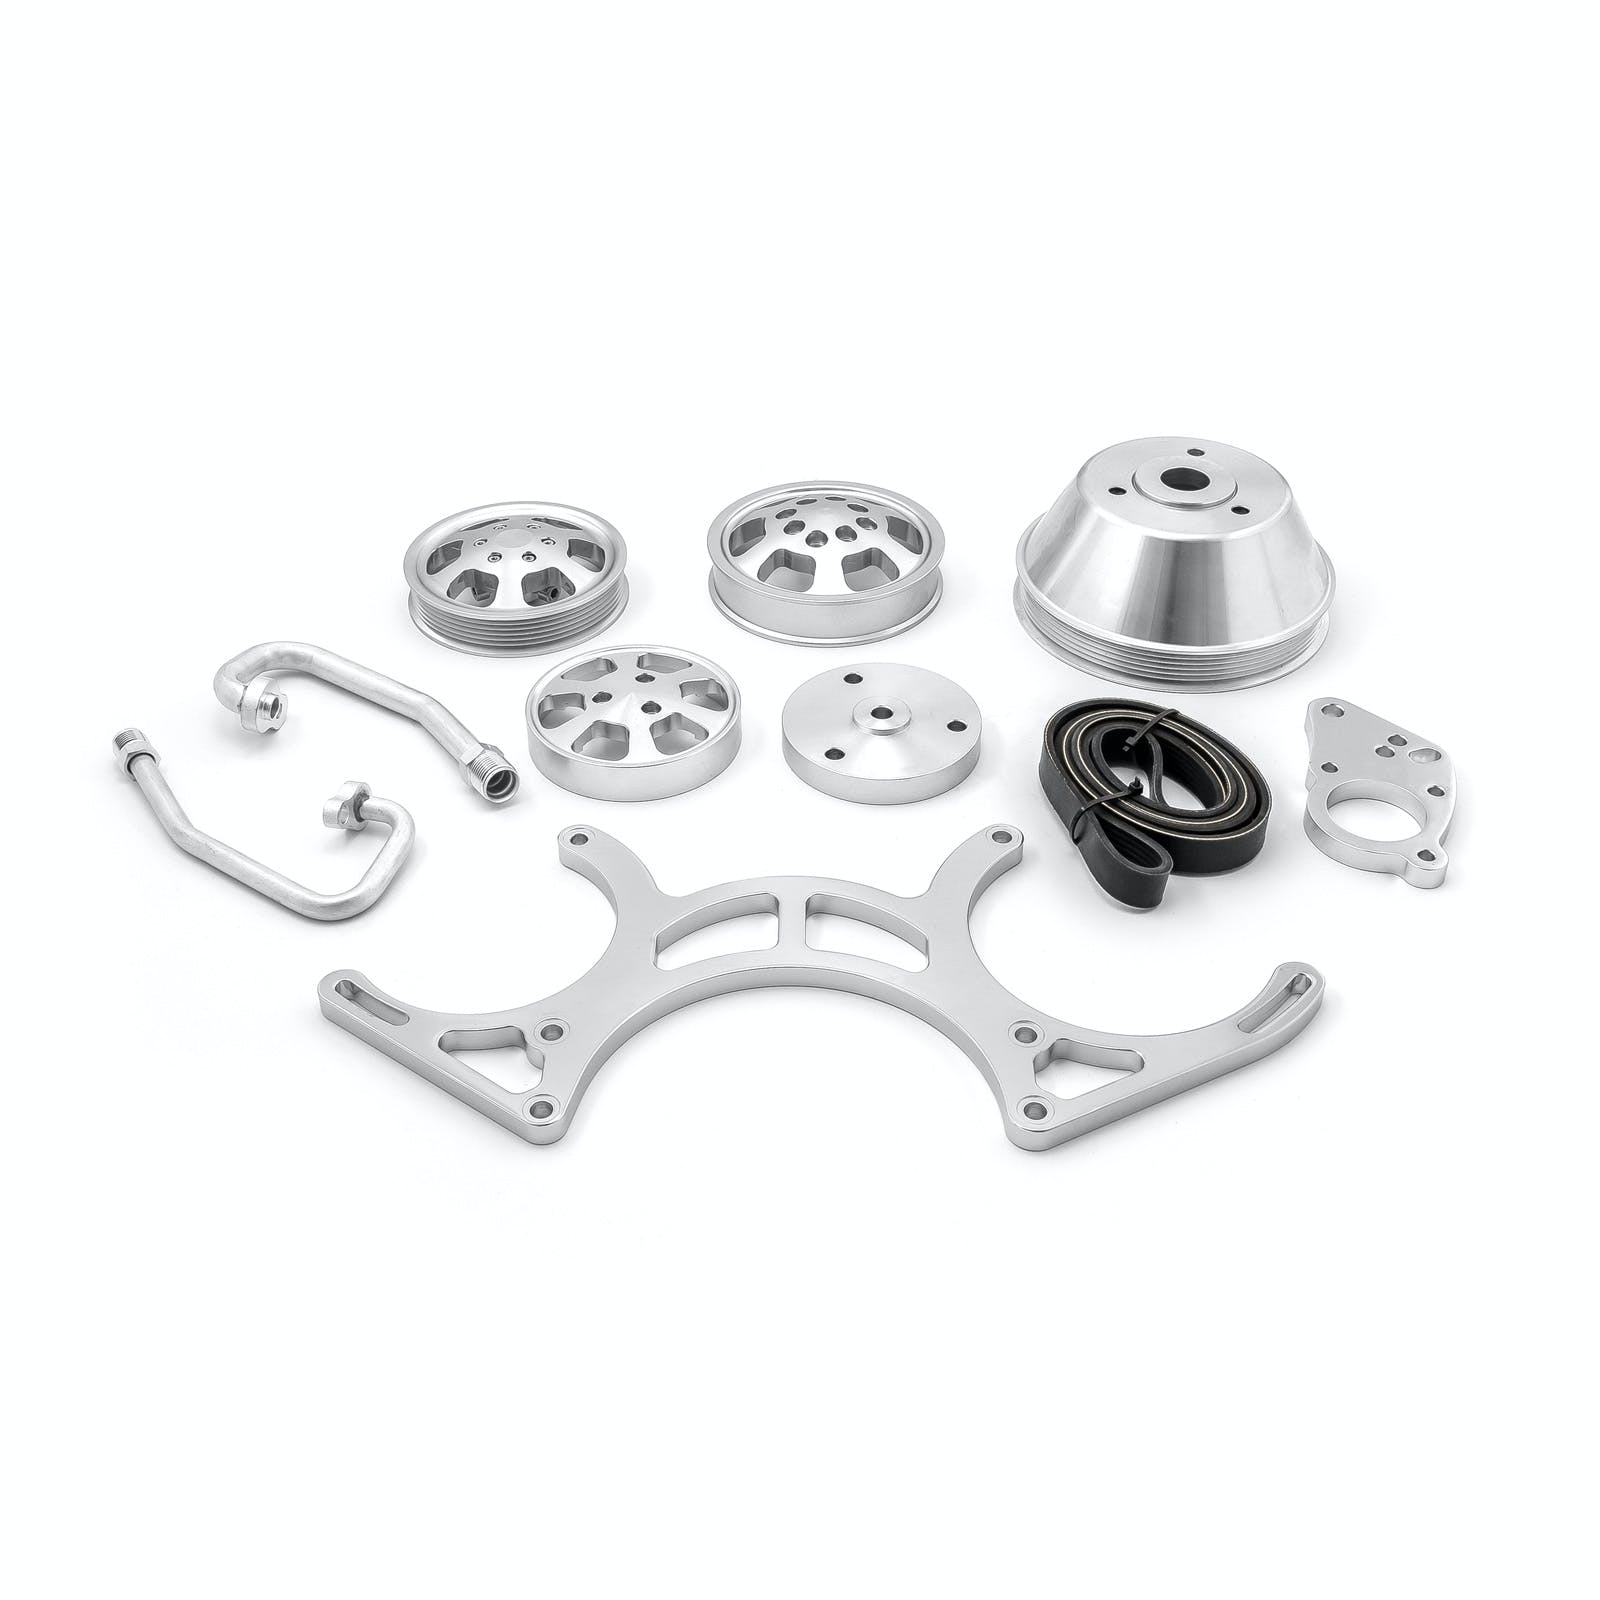 Speedmaster PCE415.1028 Aluminum Serpentine Complete Engine Pulley and Components Kit